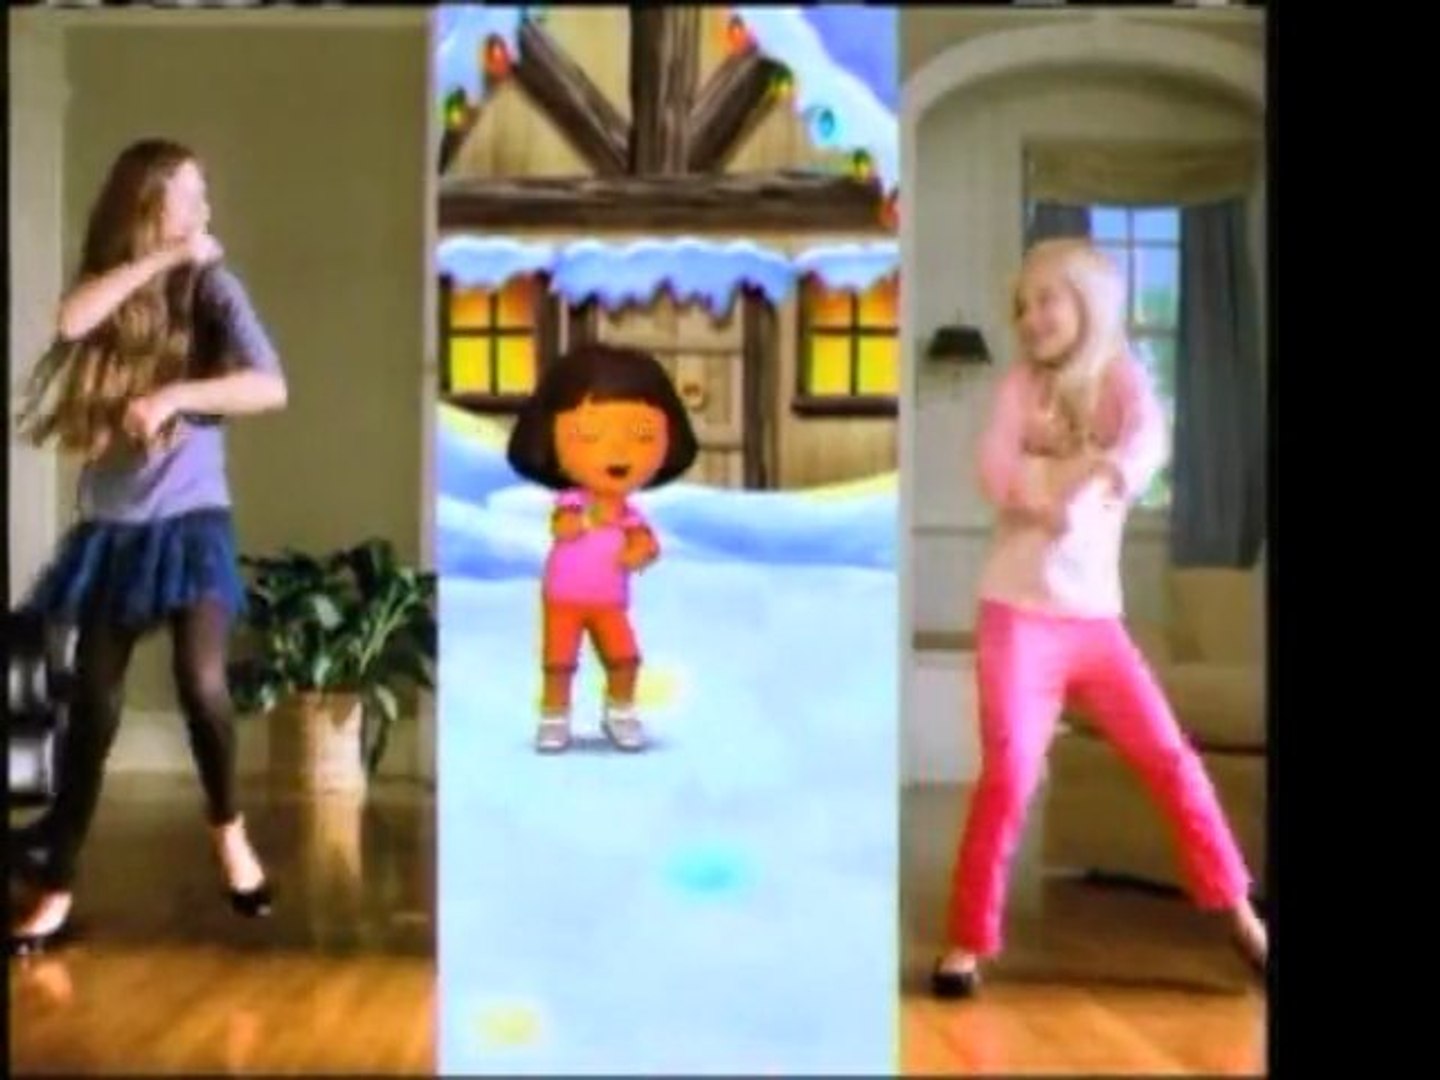 nickelodeon dance commercial - video Dailymotion